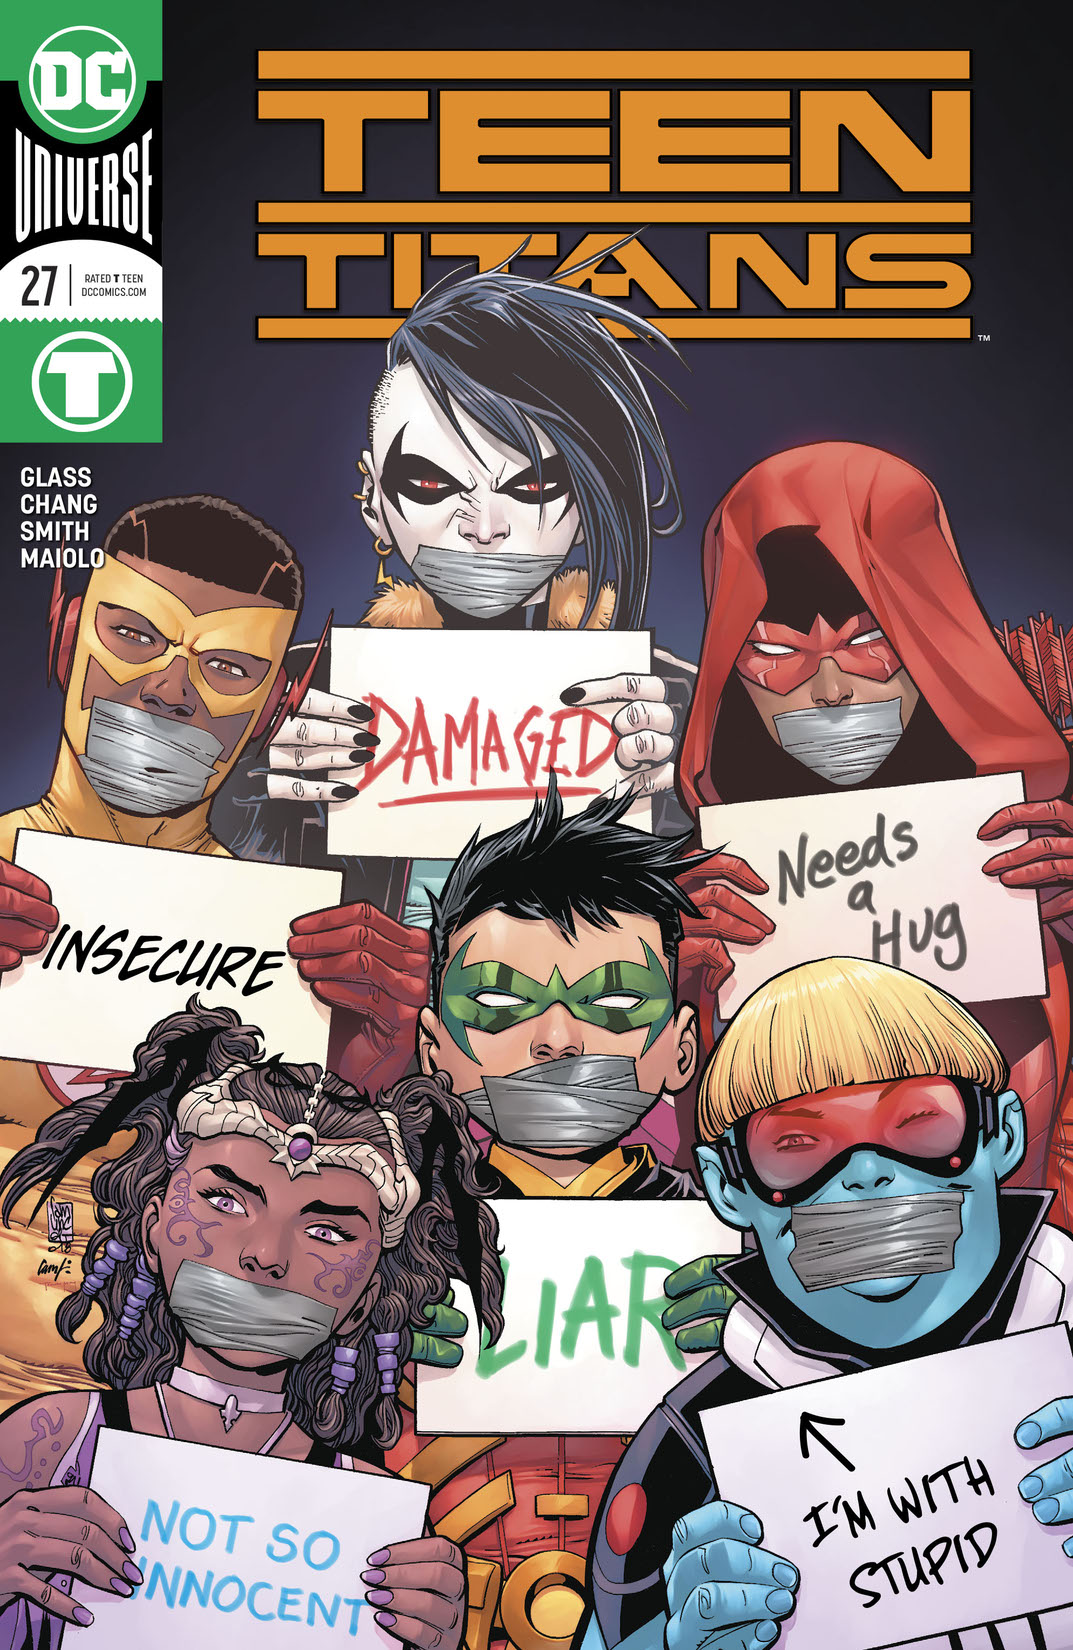 Teen Titans (2016-) #27 preview images